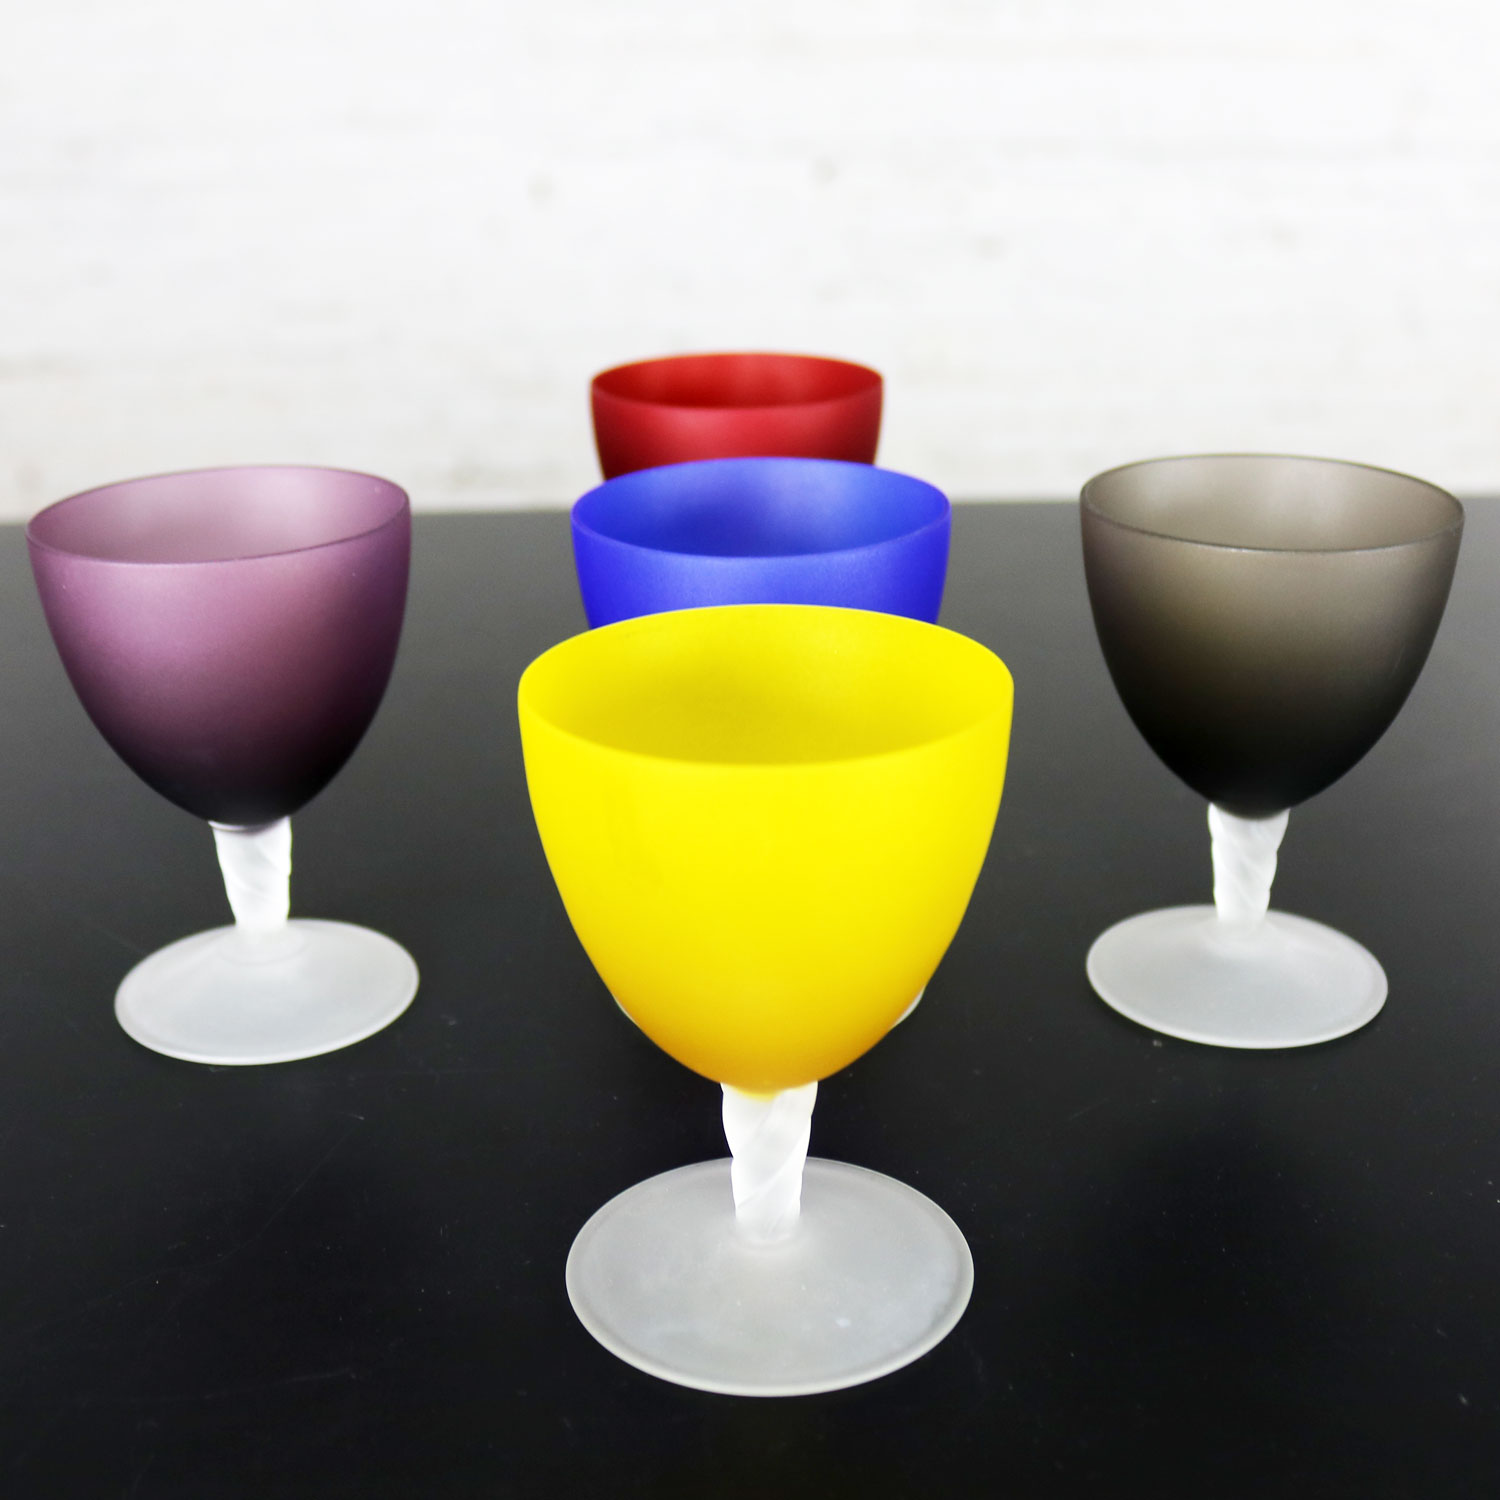 Set of 5 Small Multi-Colored Frosted Glass Wine Coupes or Cordial Glasses